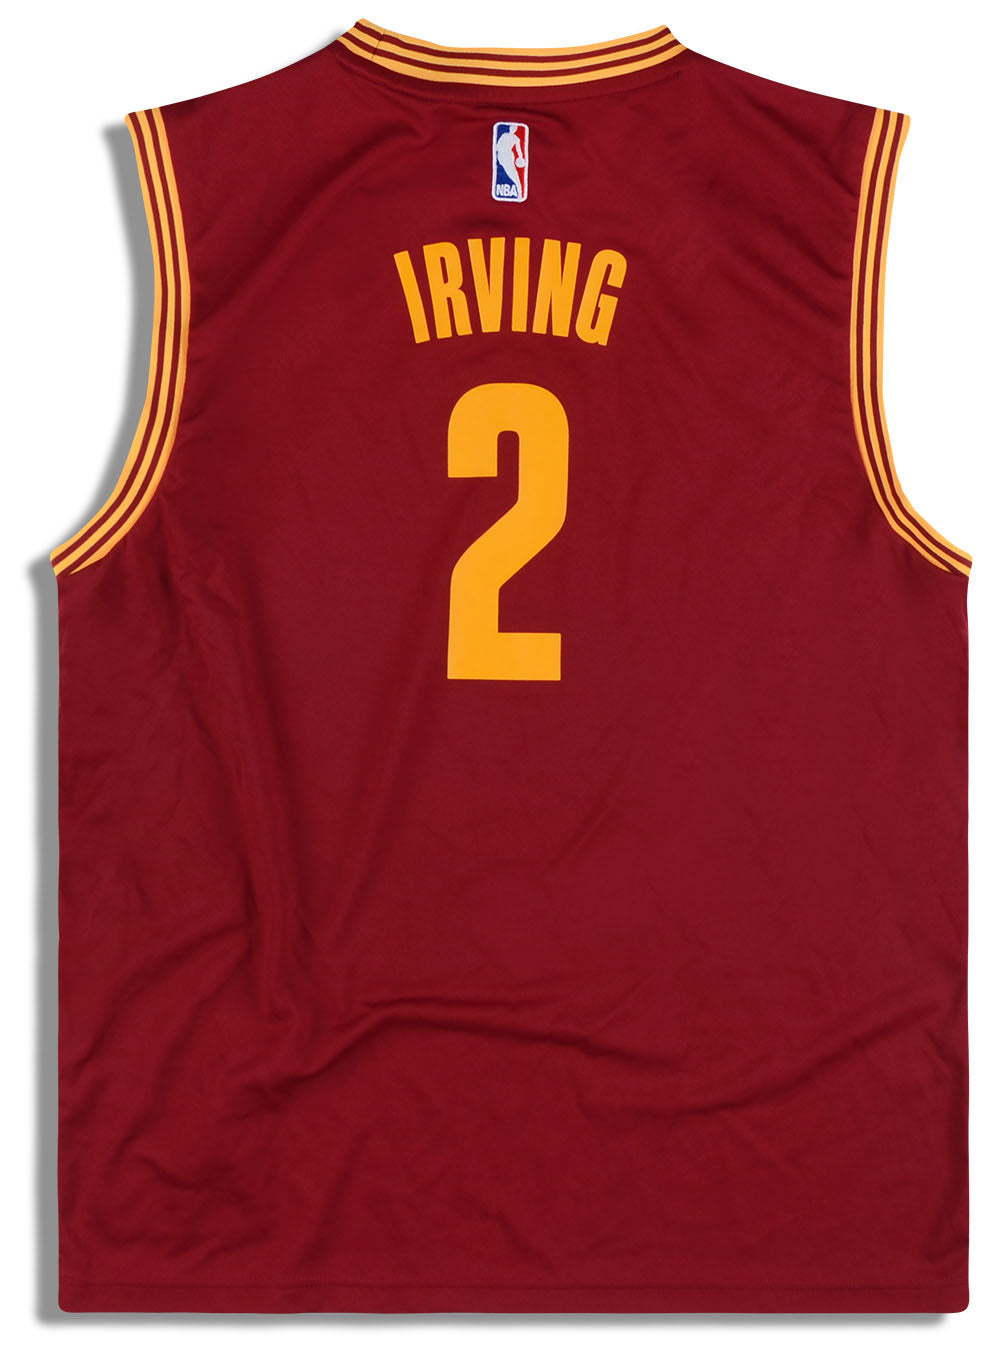 2014-17 CLEVELAND CAVALIERS IRVING #2 ADIDAS JERSEY (AWAY) Y